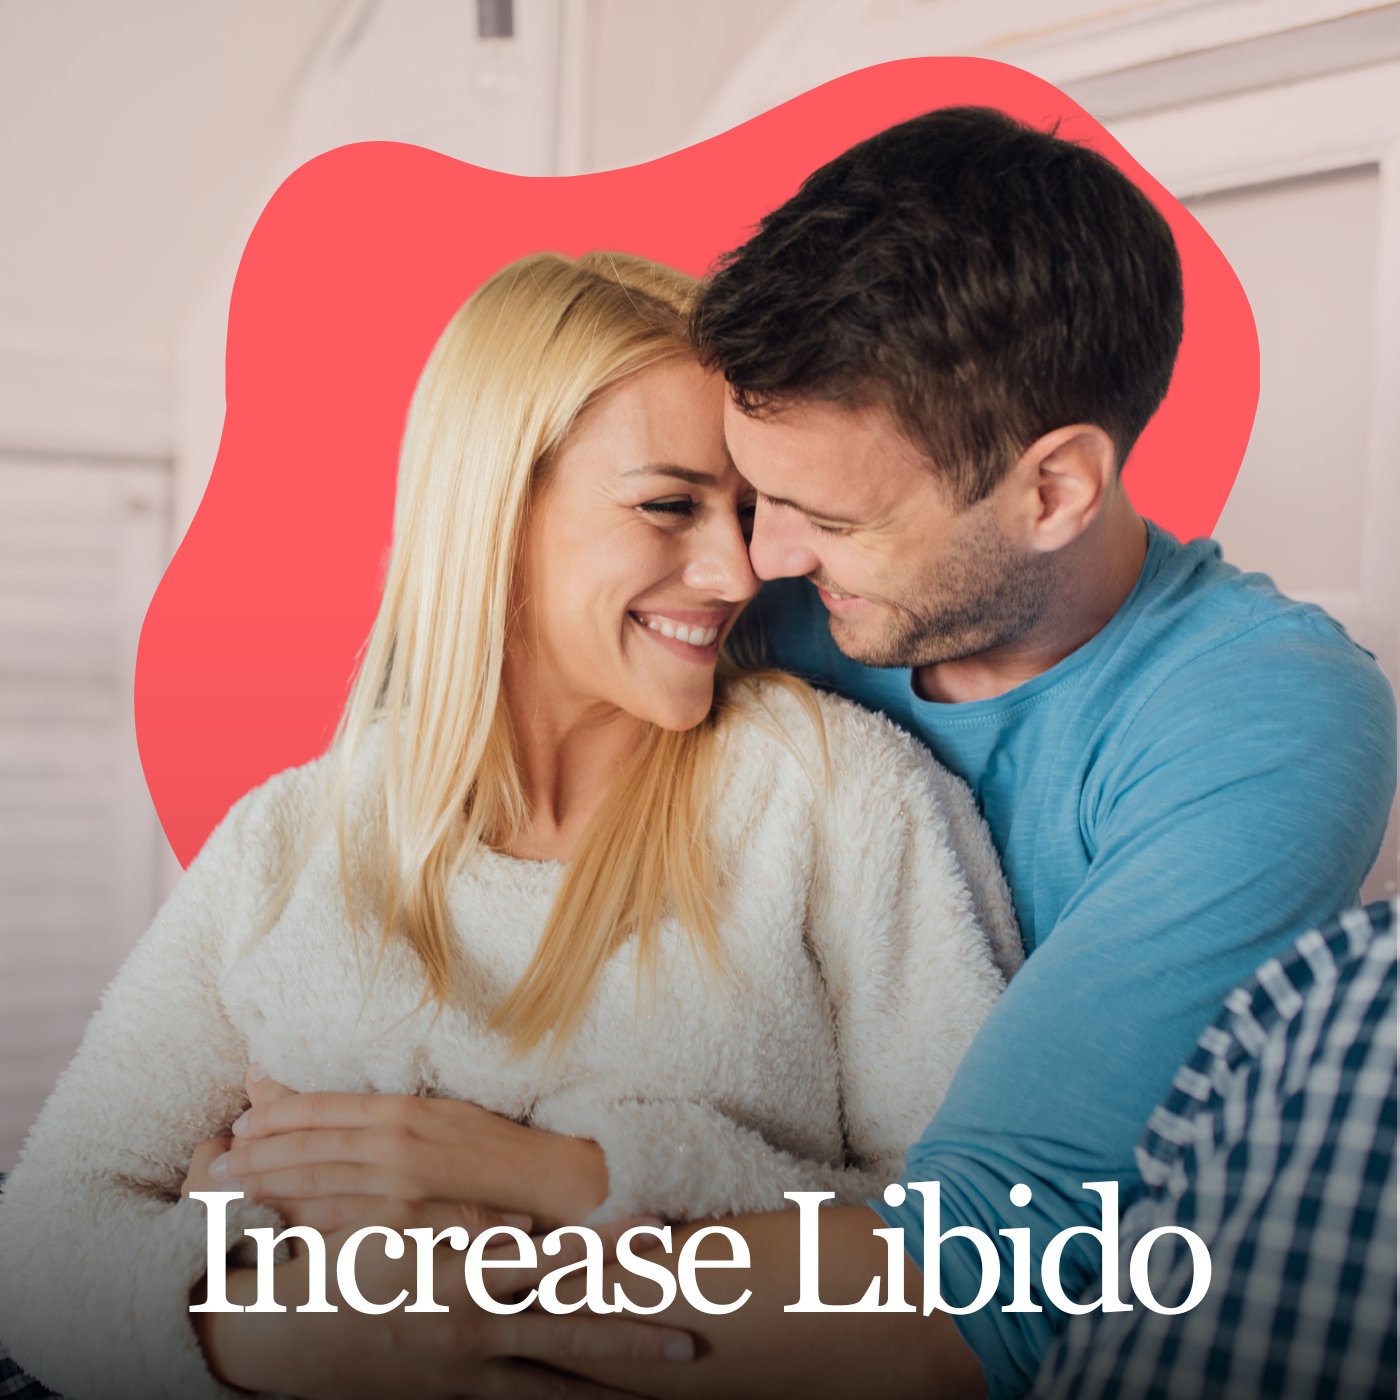 Increase Libido Hypnotherapy (Sex drive for him or for her) - Clearmindshypnotherapy